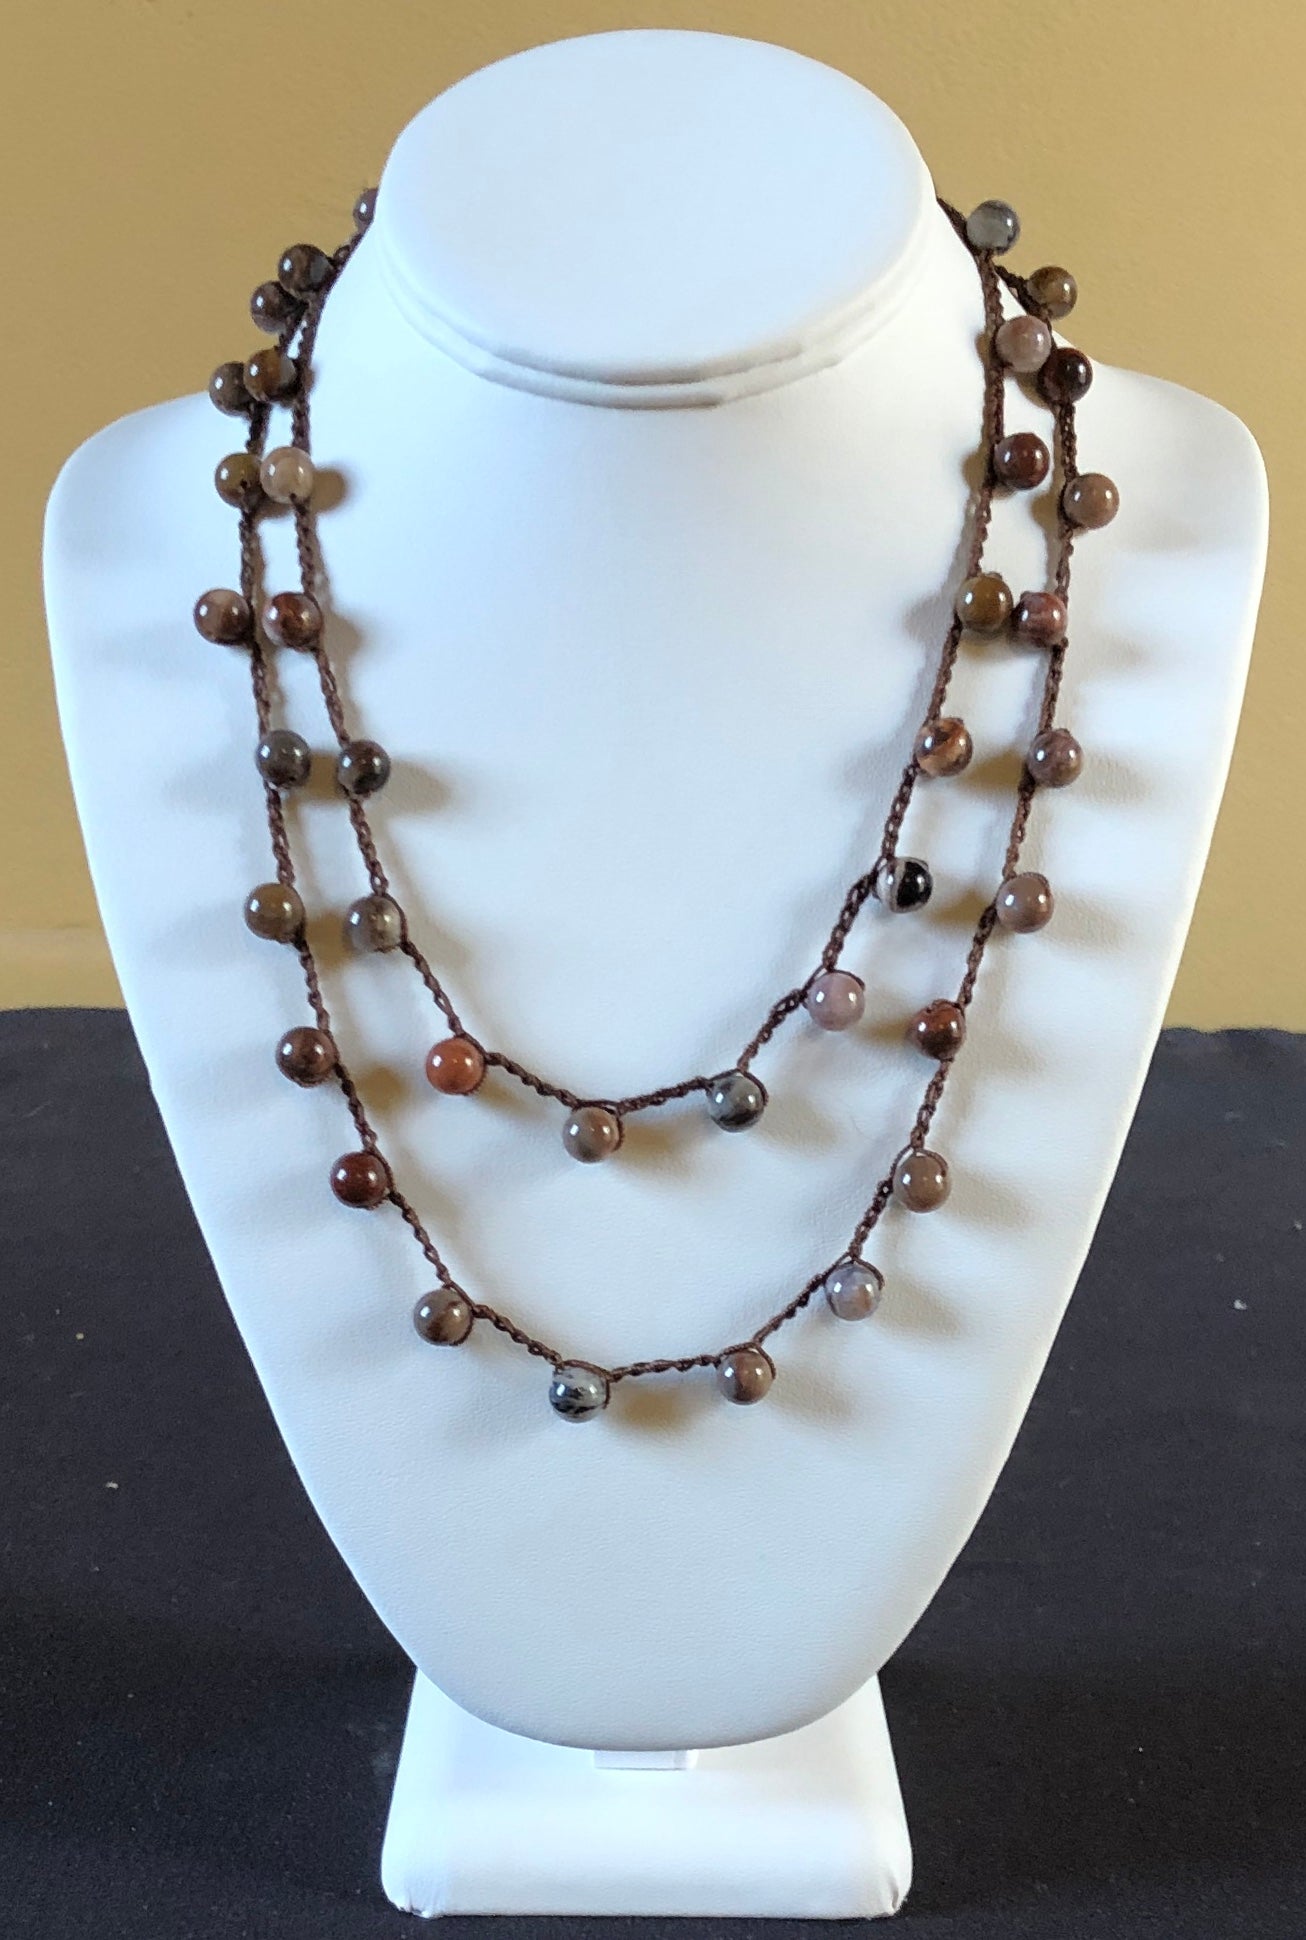 Necklace - Brown crocheted with petrified wood bead